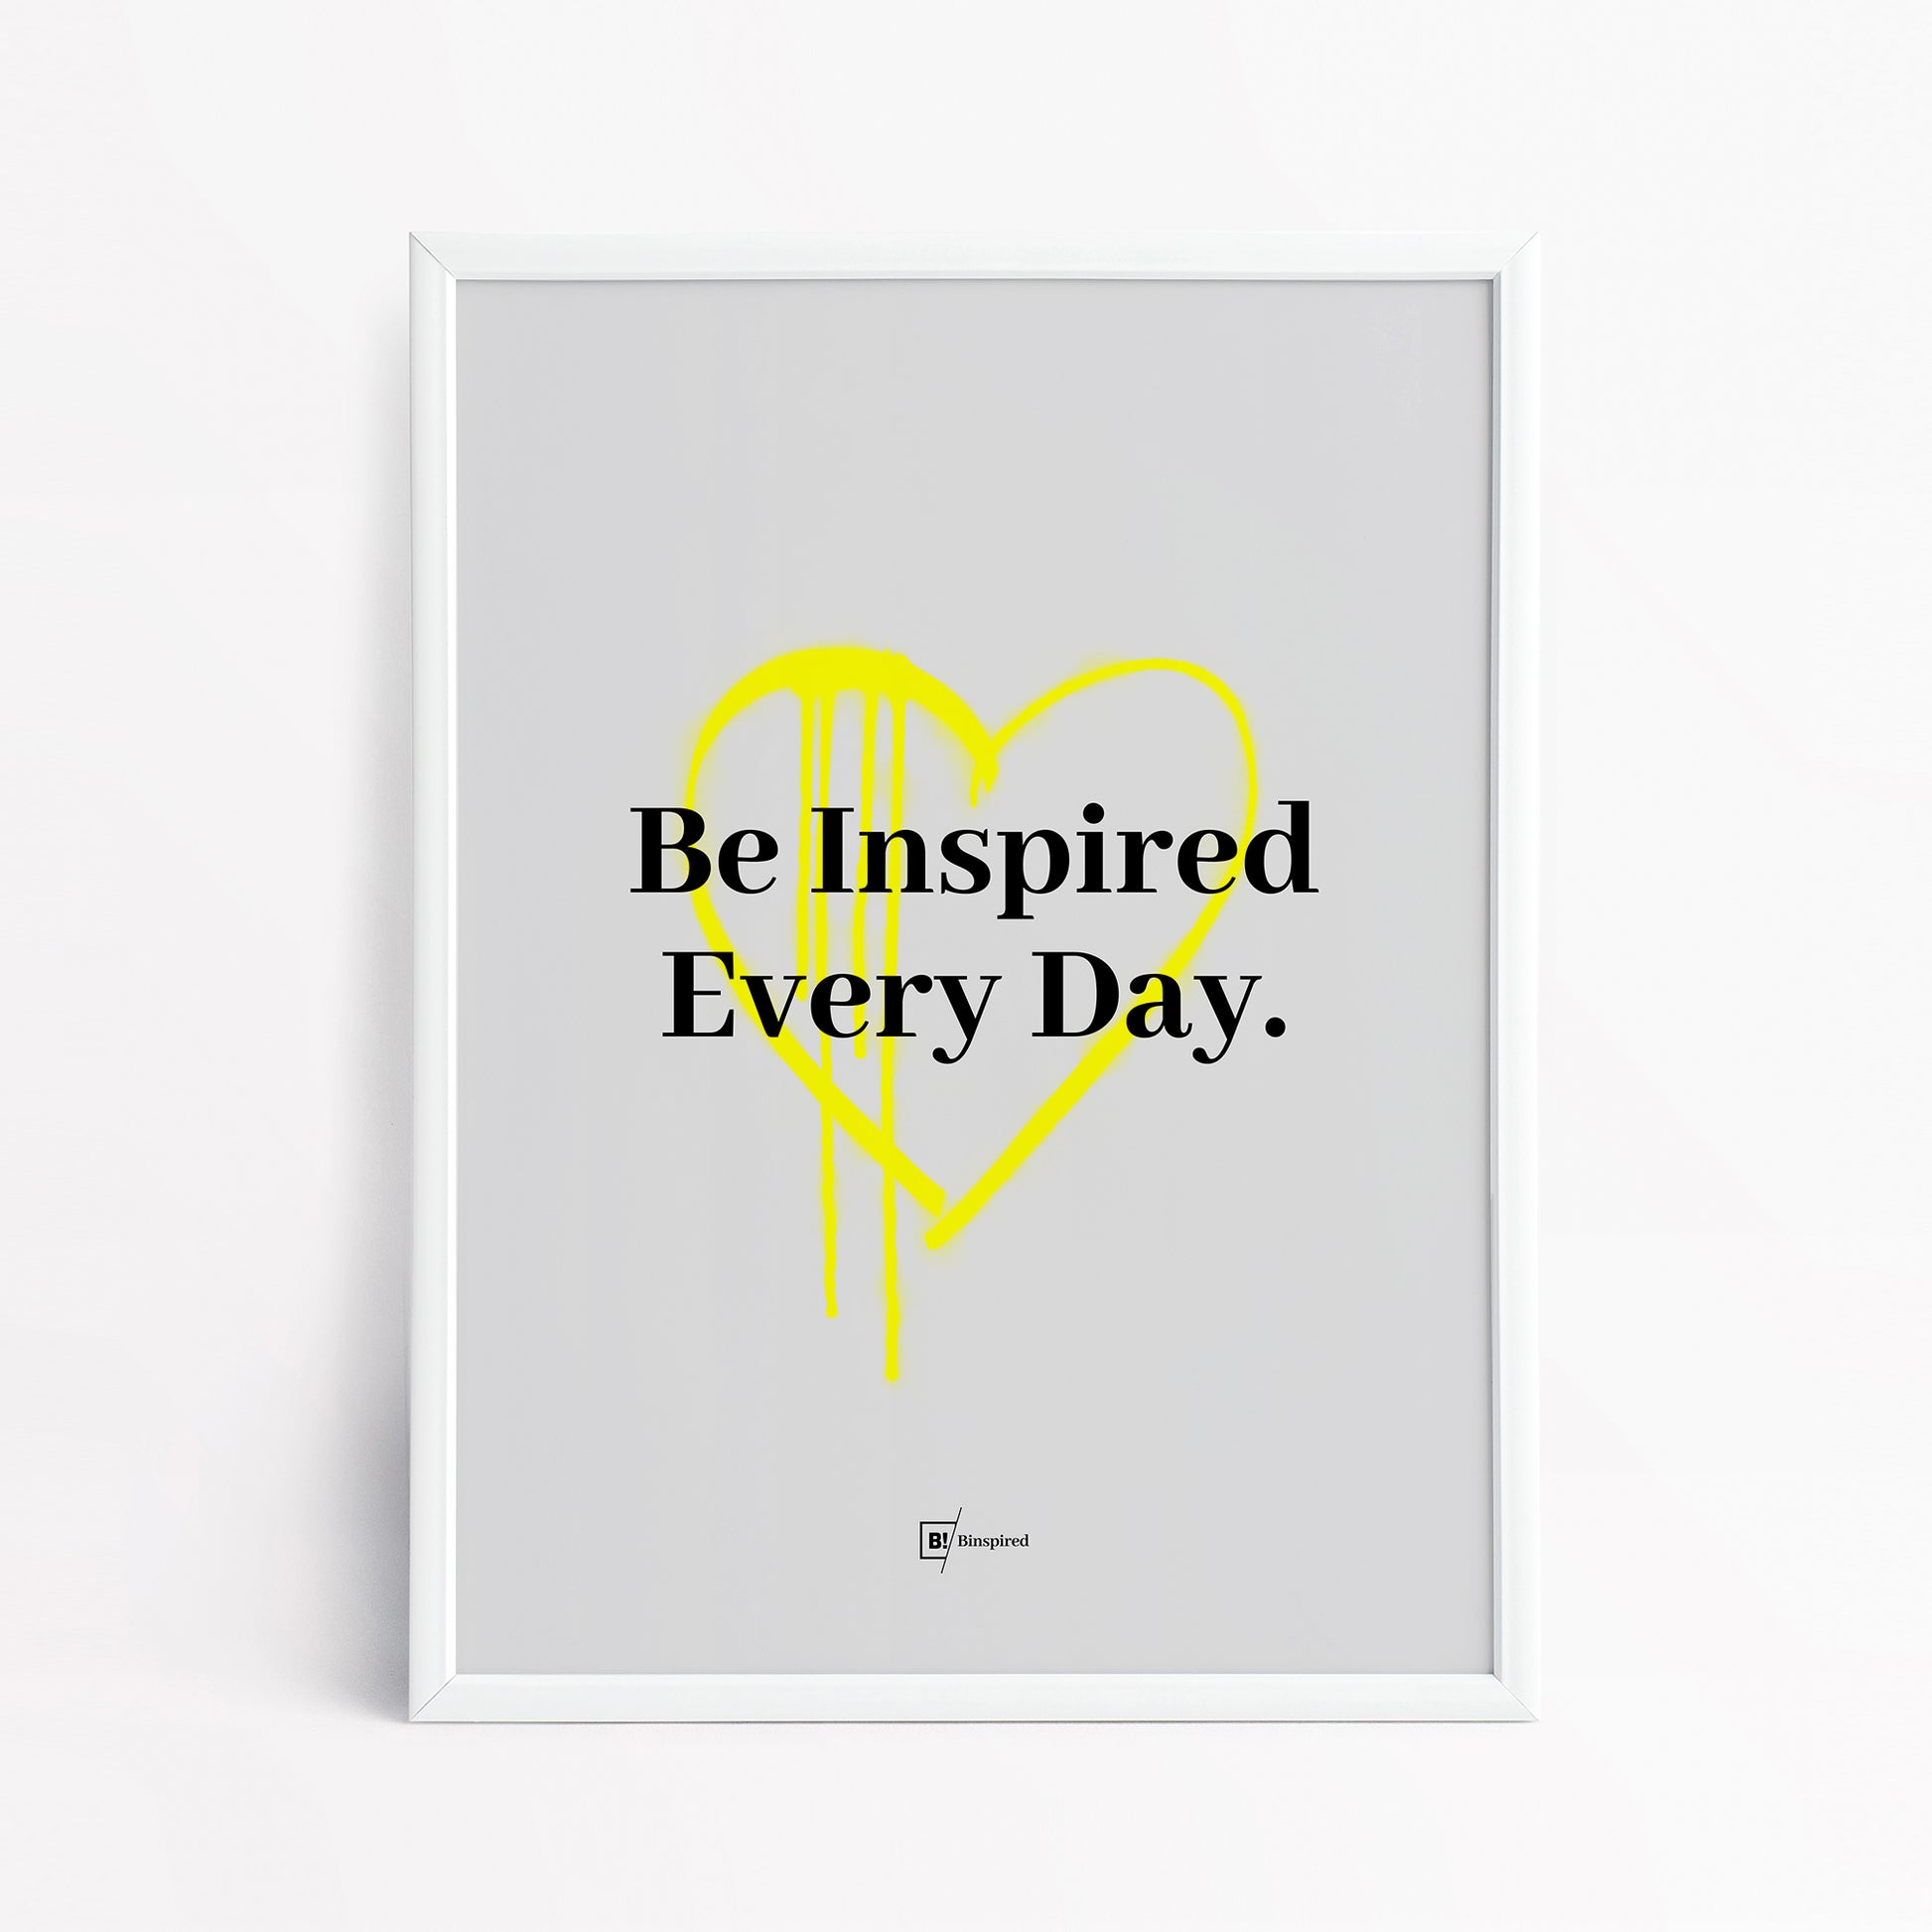 Be inspired by our "Be Inspired Every Day" quote art print! This artwork was printed using the giclée process on archival acid-free paper and is presented in a simple white frame that captures its timeless beauty in every detail.